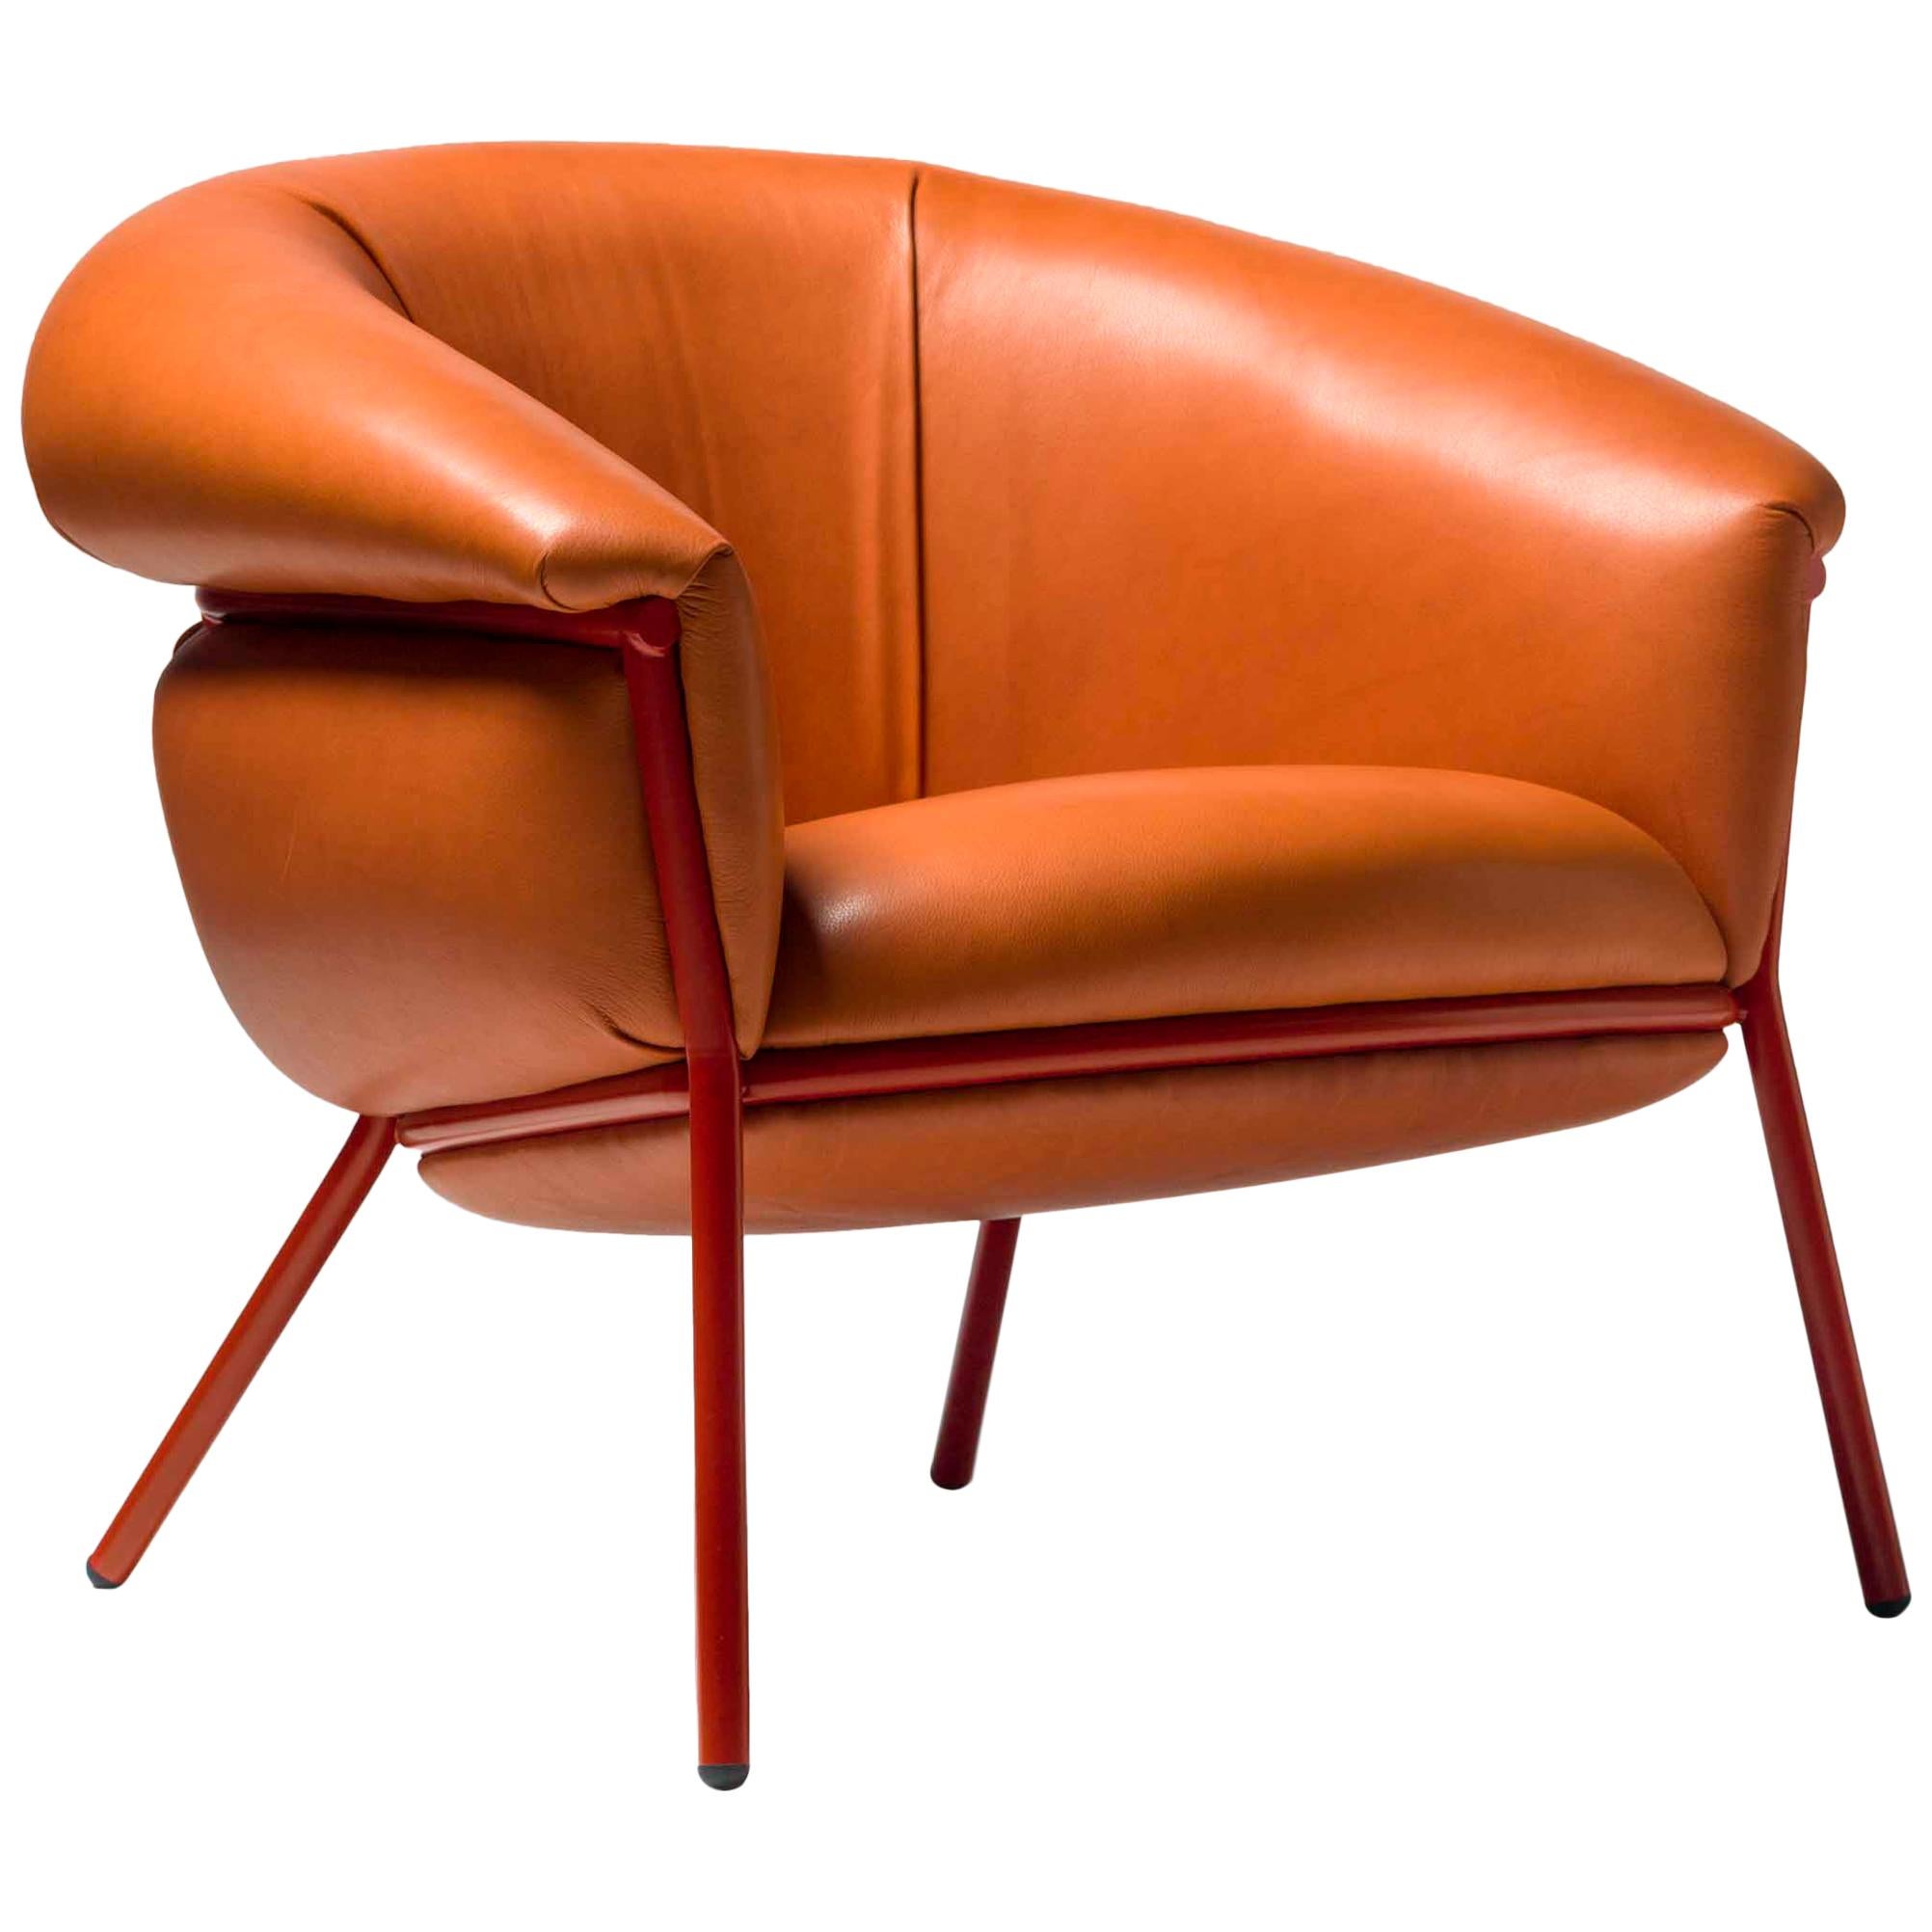 “Grasso is not fat. Grasso is more than fat. It’s overflowing.” This is how Stephen Burks sums up his collection for BD. An armchair that pursues “ultra-comfort”, and invites you to sit on it. The leather upholstery oozes over the bare iron